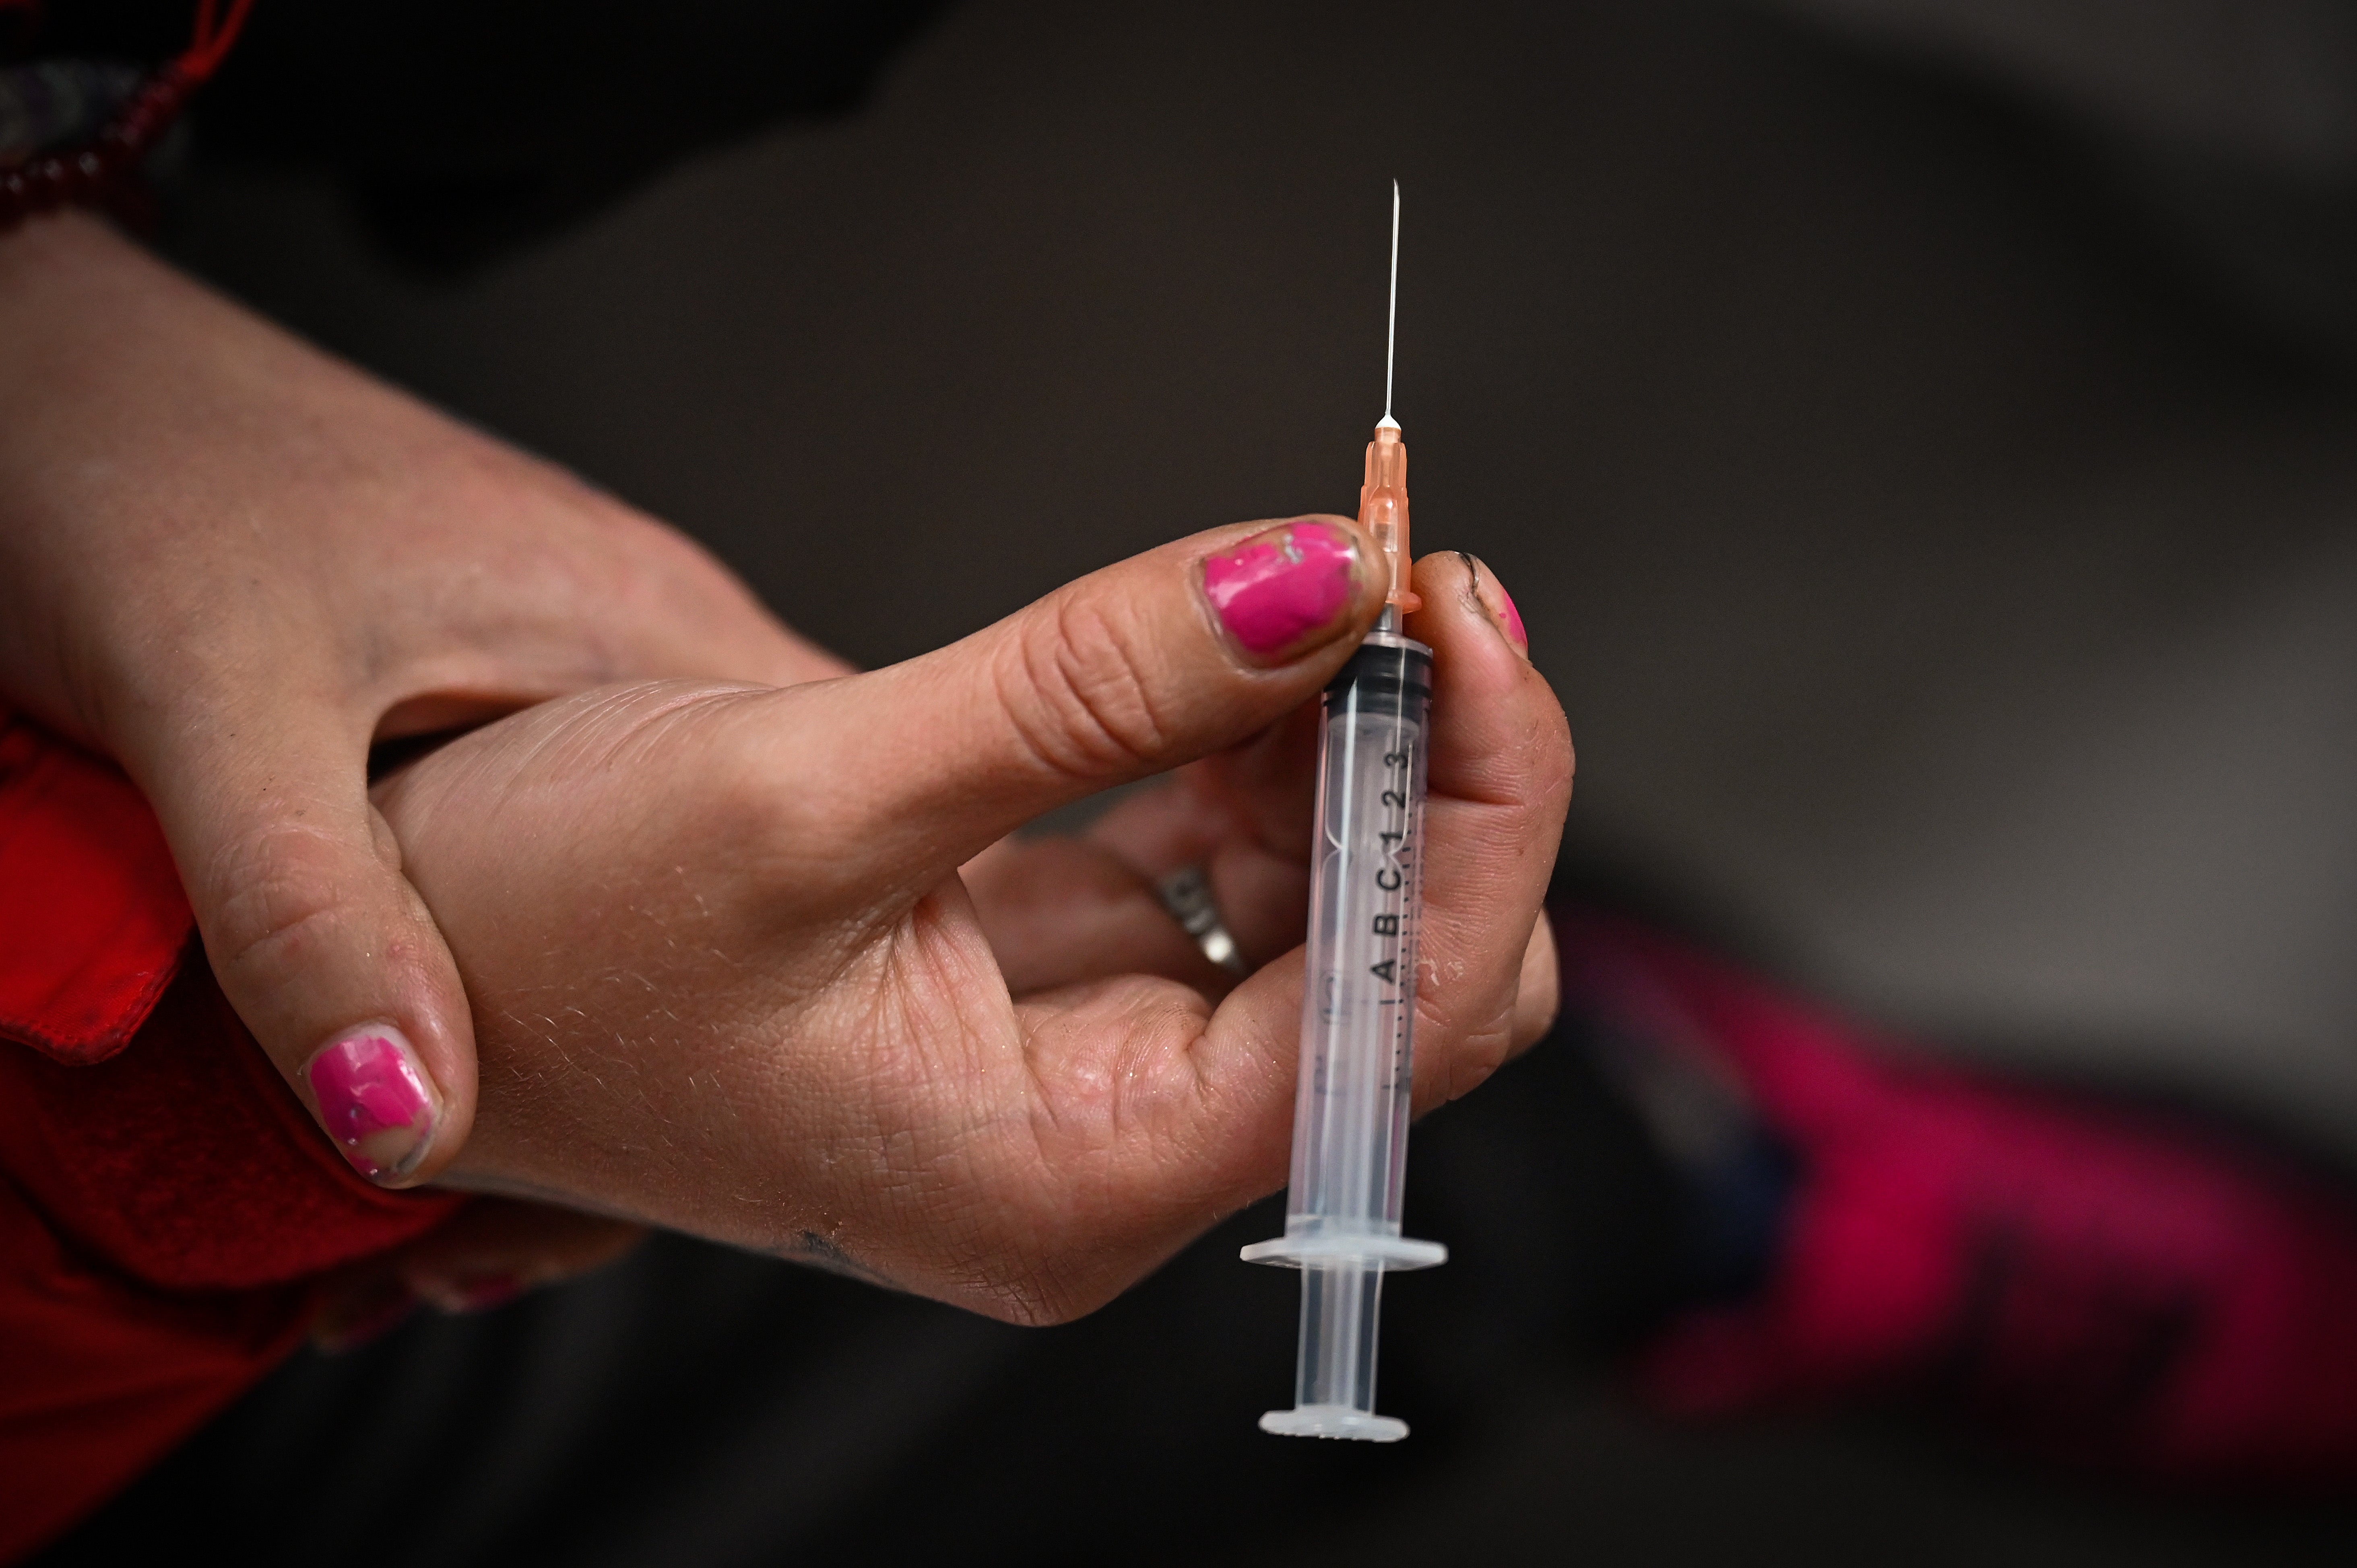 Heroin-assisted treatment has been used successfully in Switzerland for decades